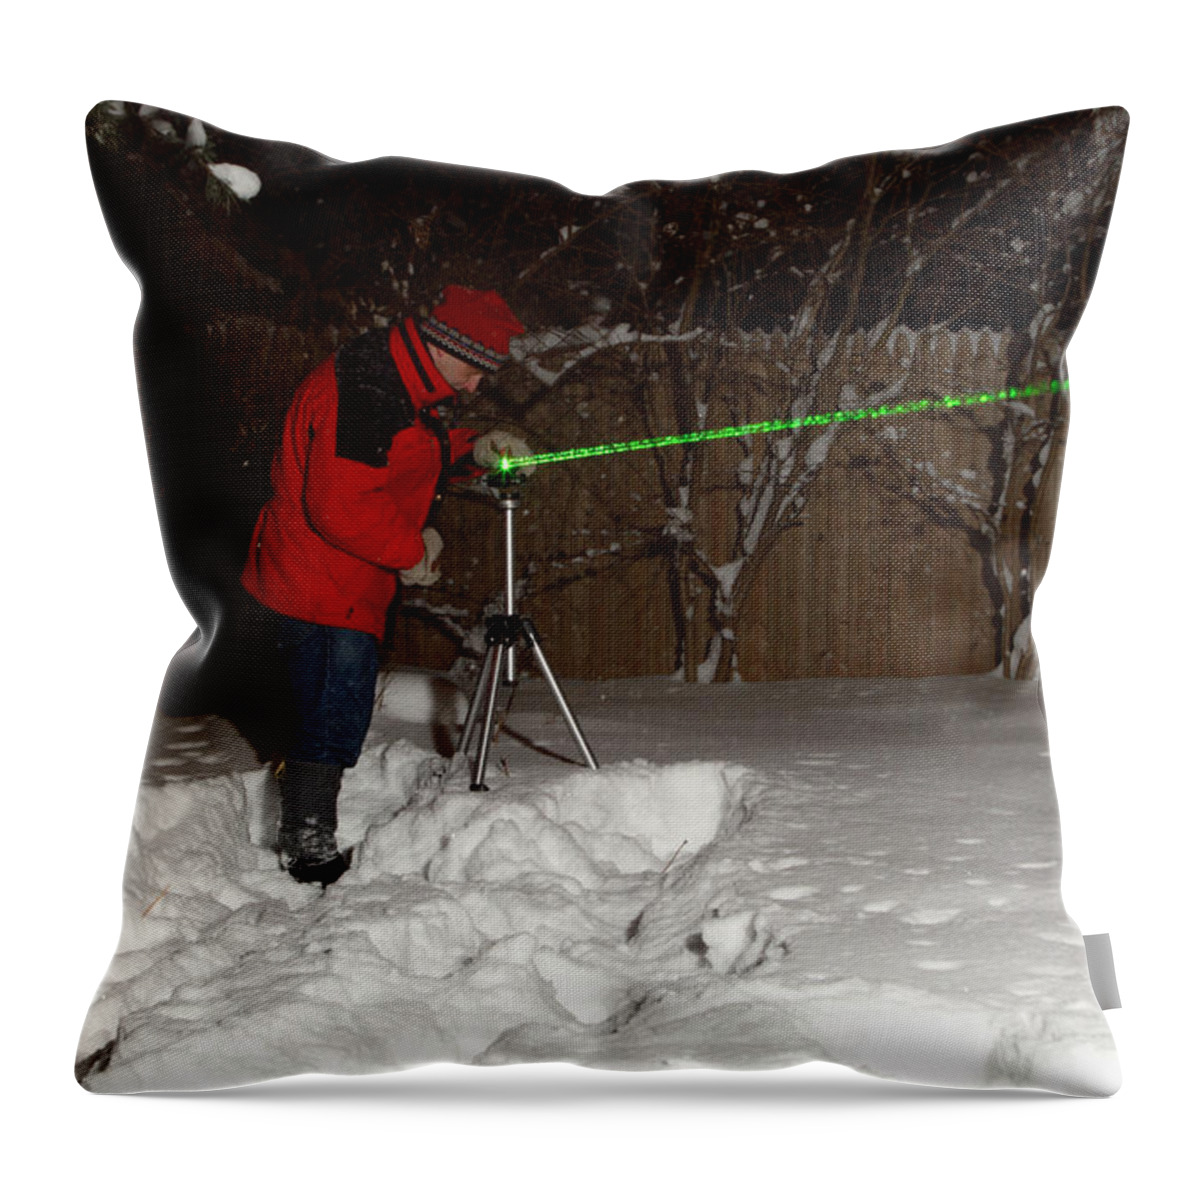 People Throw Pillow featuring the photograph Snow Researcher by Ted Kinsman